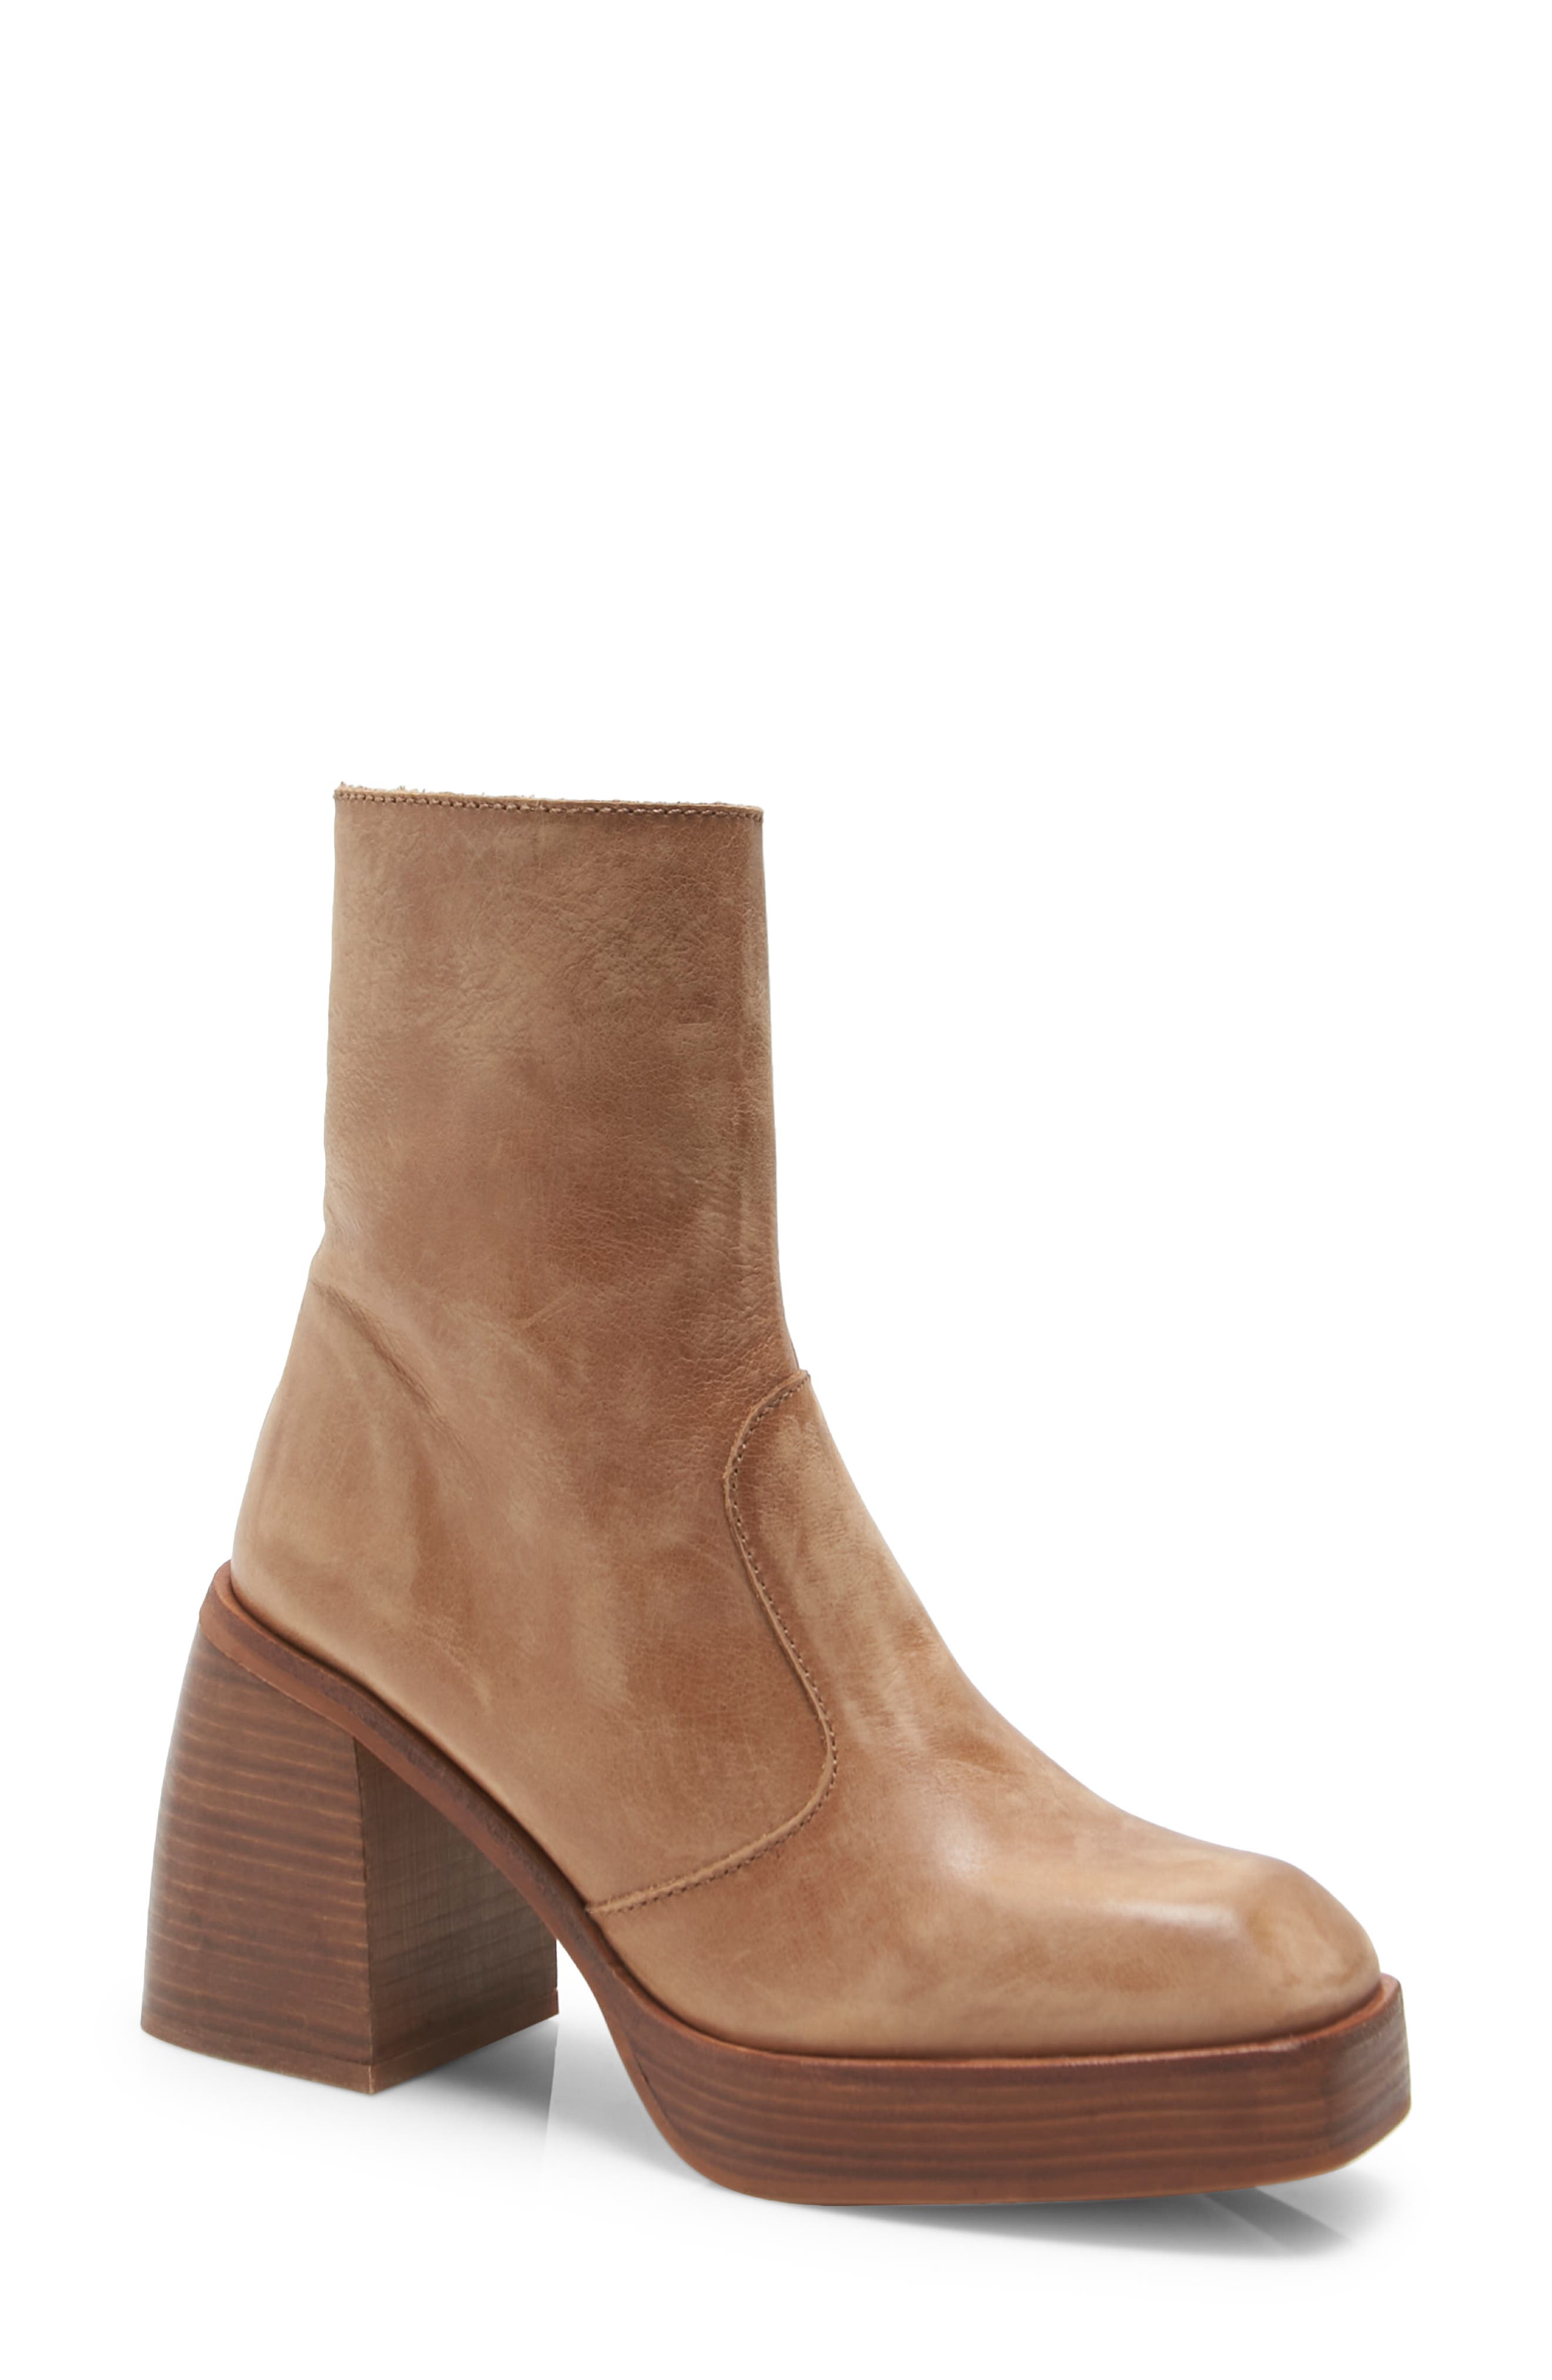 NEW Free People The Last Outlaw Suede Ankle Boots